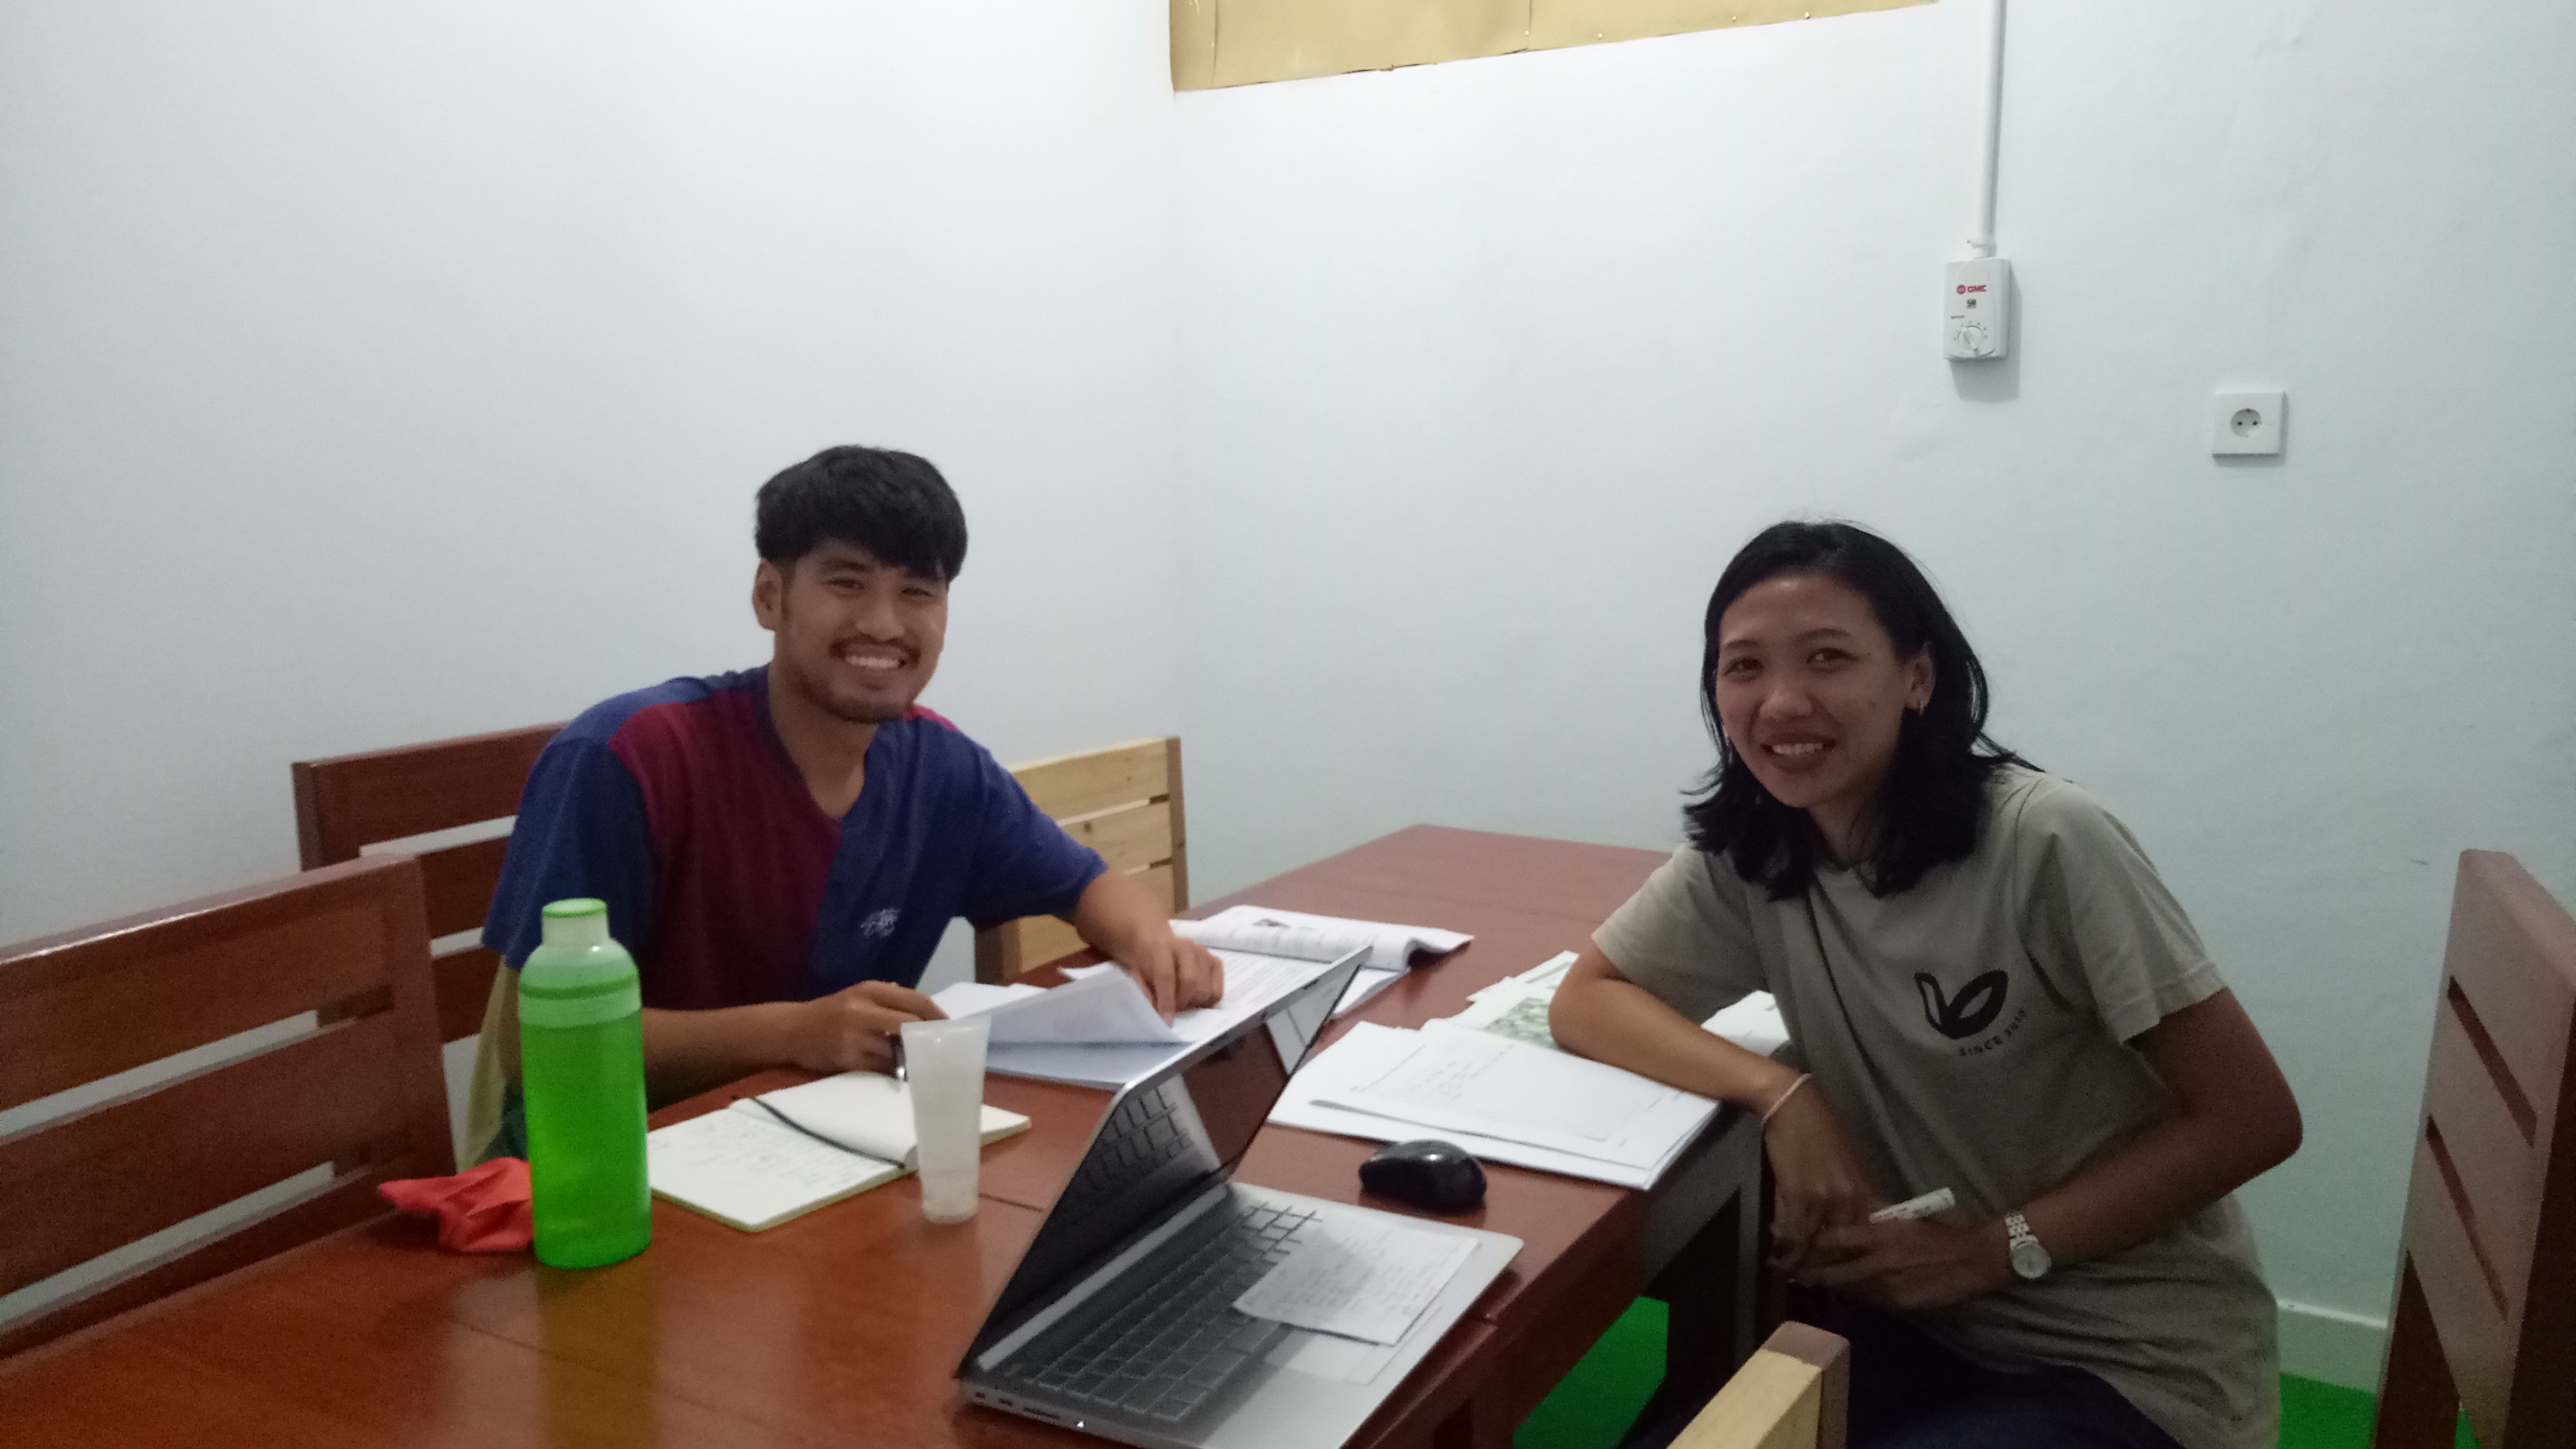 Indonesian language course - One on One 